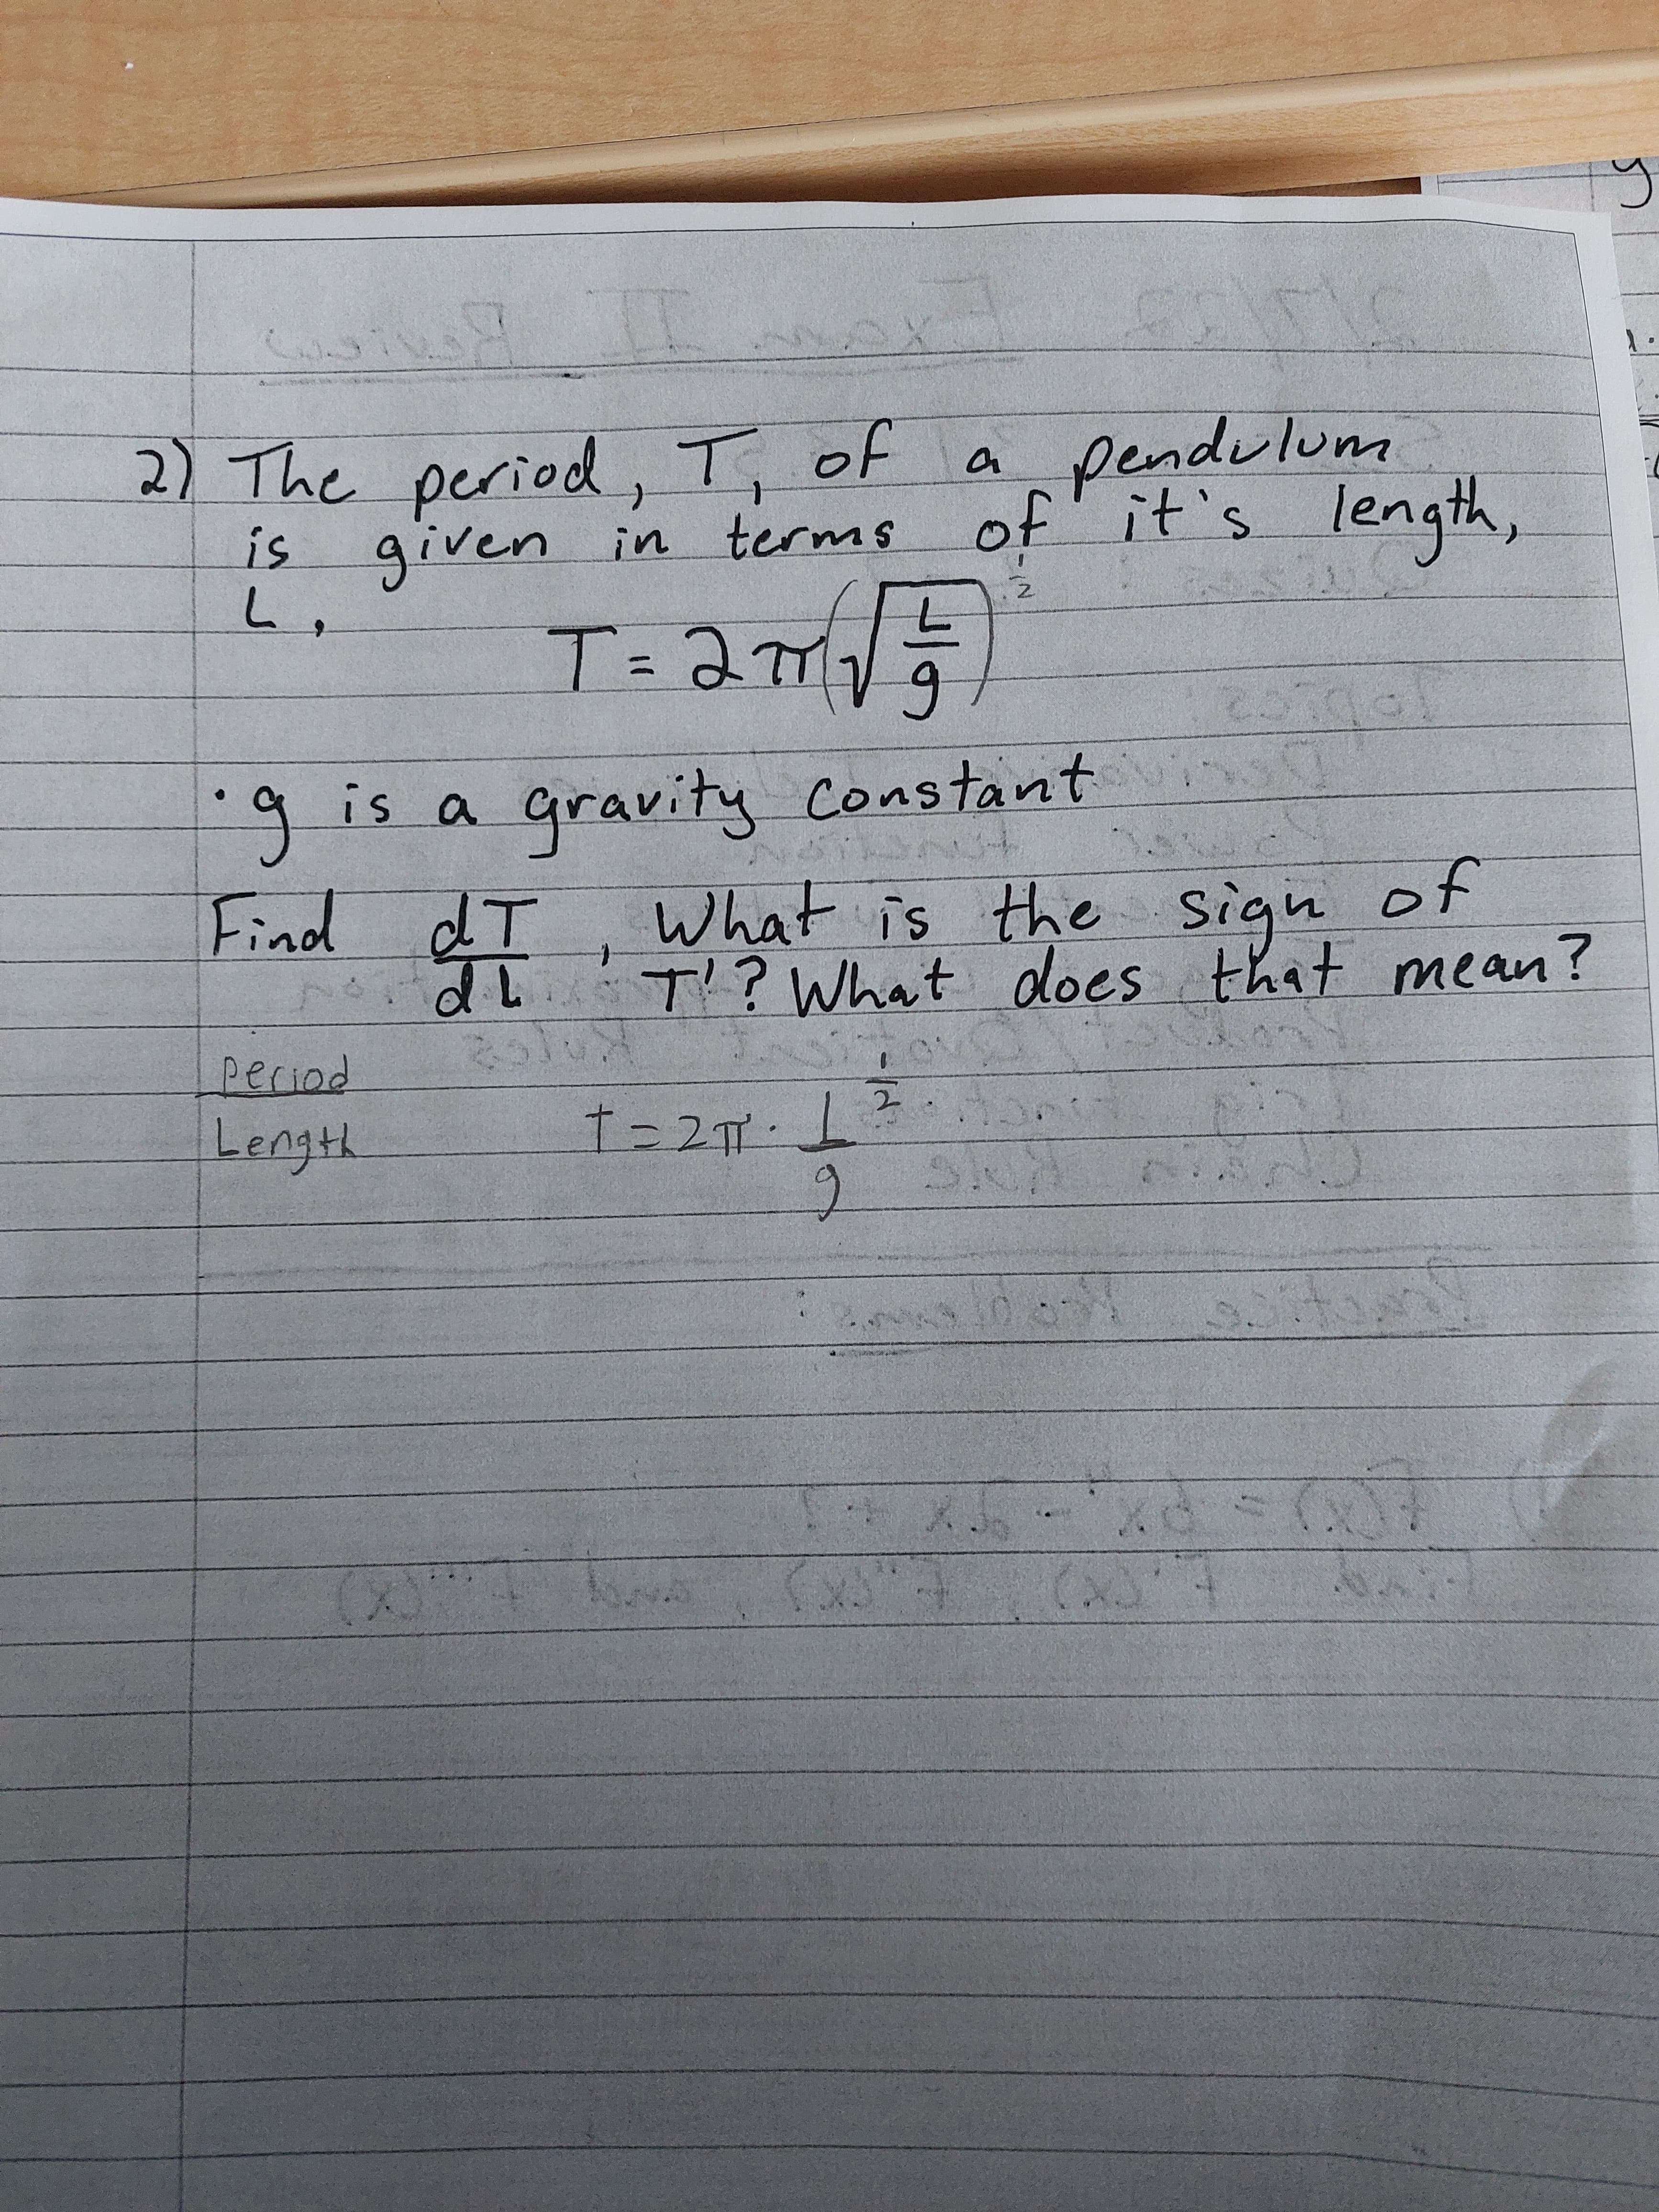 2) The period, T, of
a pendulum
is given in terms of' it's
S.
length,
is a gravity constant
6.
IP pouind
dL.T?What does that mean?
What is the sign of
